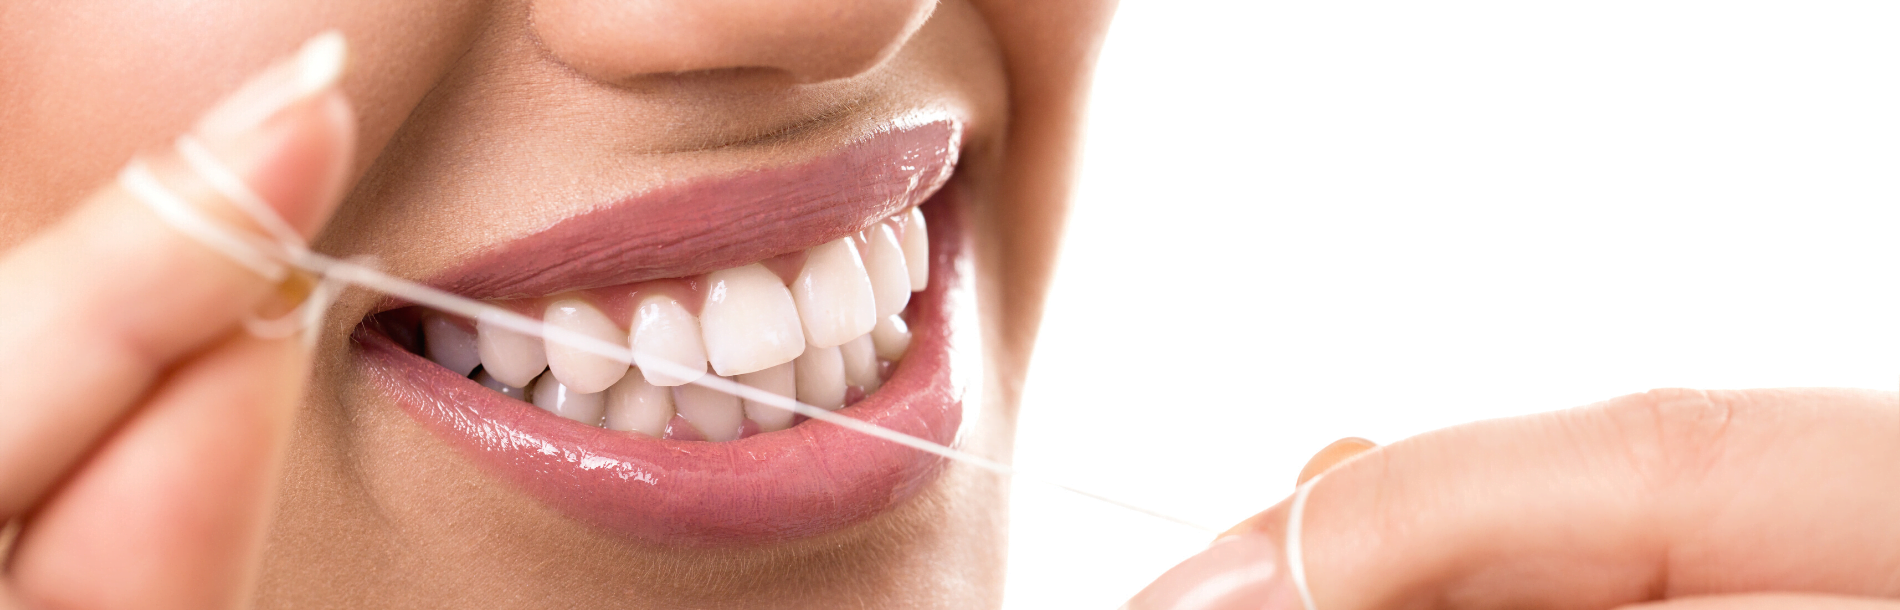 tips for flossing